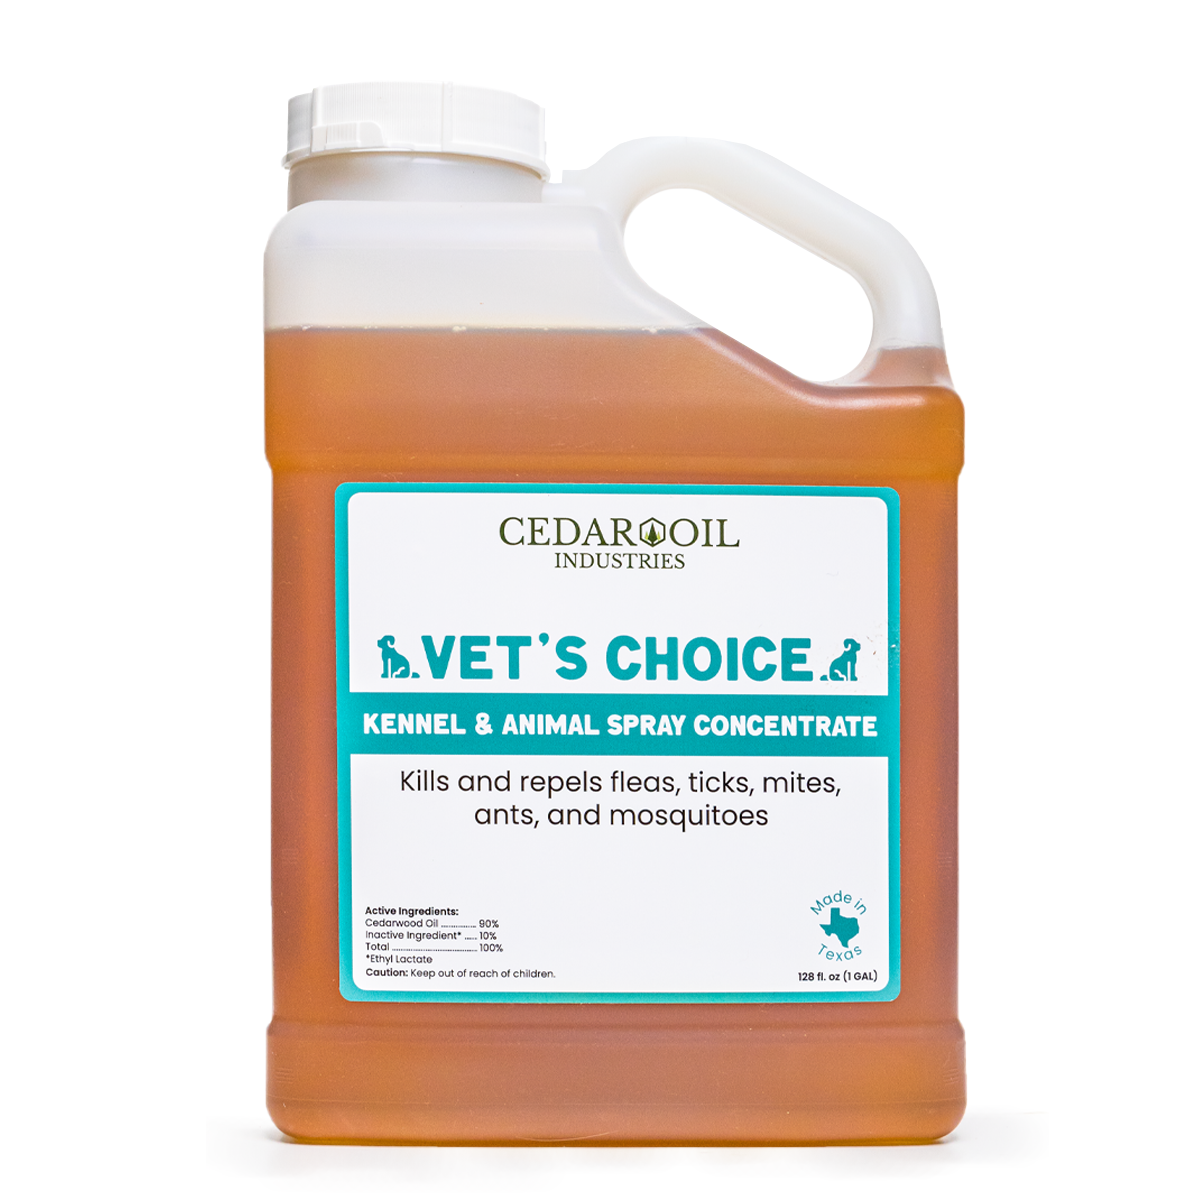 Vet's Choice Concentrate - Lawn, Kennel & Pet Spray